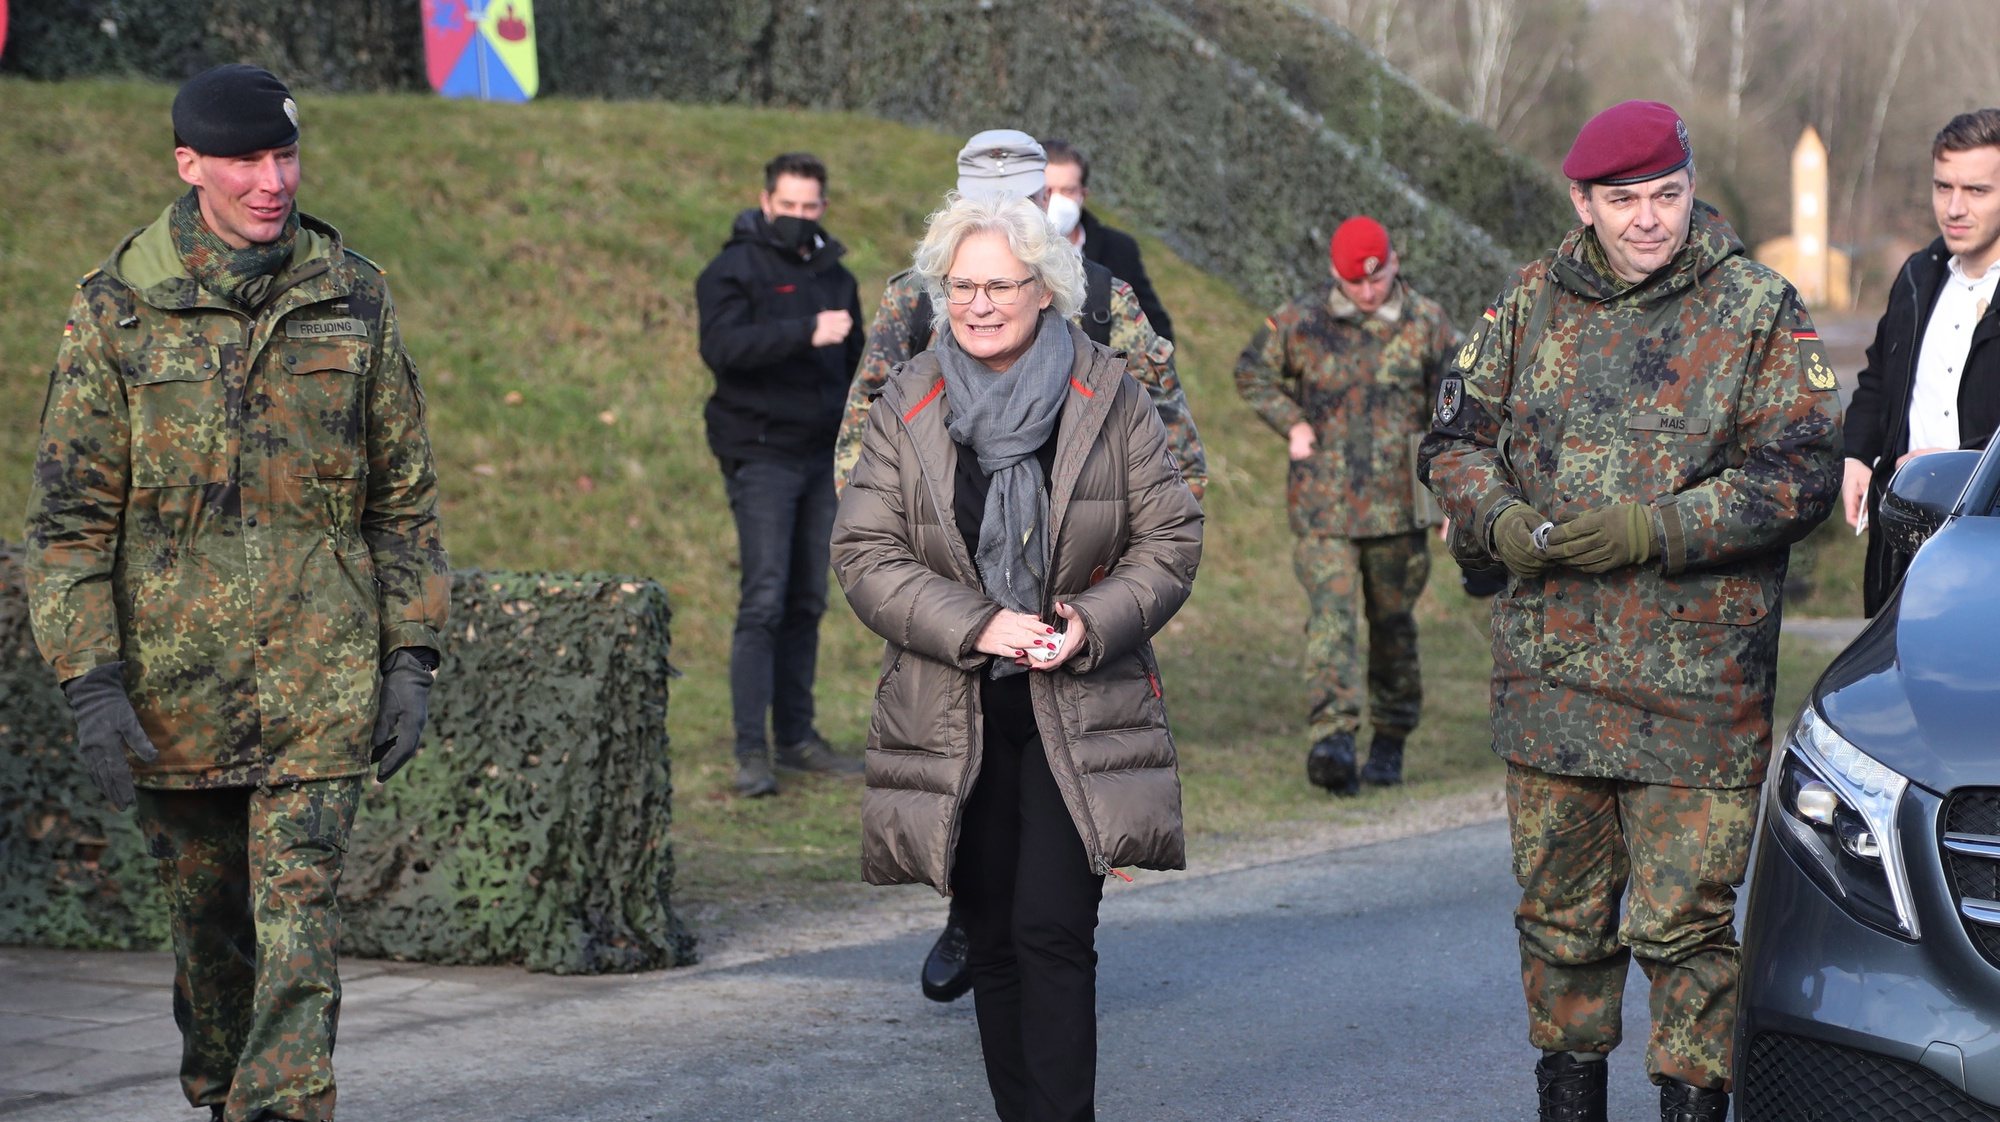 epa09735142 The German Minister of Defense Christine Lambrecht (C) with the commander of the 9th Panzerlehr Brigade Christian Freuding during her visit at the 9th Panzerlehr Brigade of the German Bundeswehr in Munster, northern Germany, 07 February 2022. At the moment, 200 soldiers of the 9th Panzerlehr Brigade take part in the NATO mission enhanced Forward Presence (eFP) in Lithuania.  EPA/FOCKE STRANGMANN